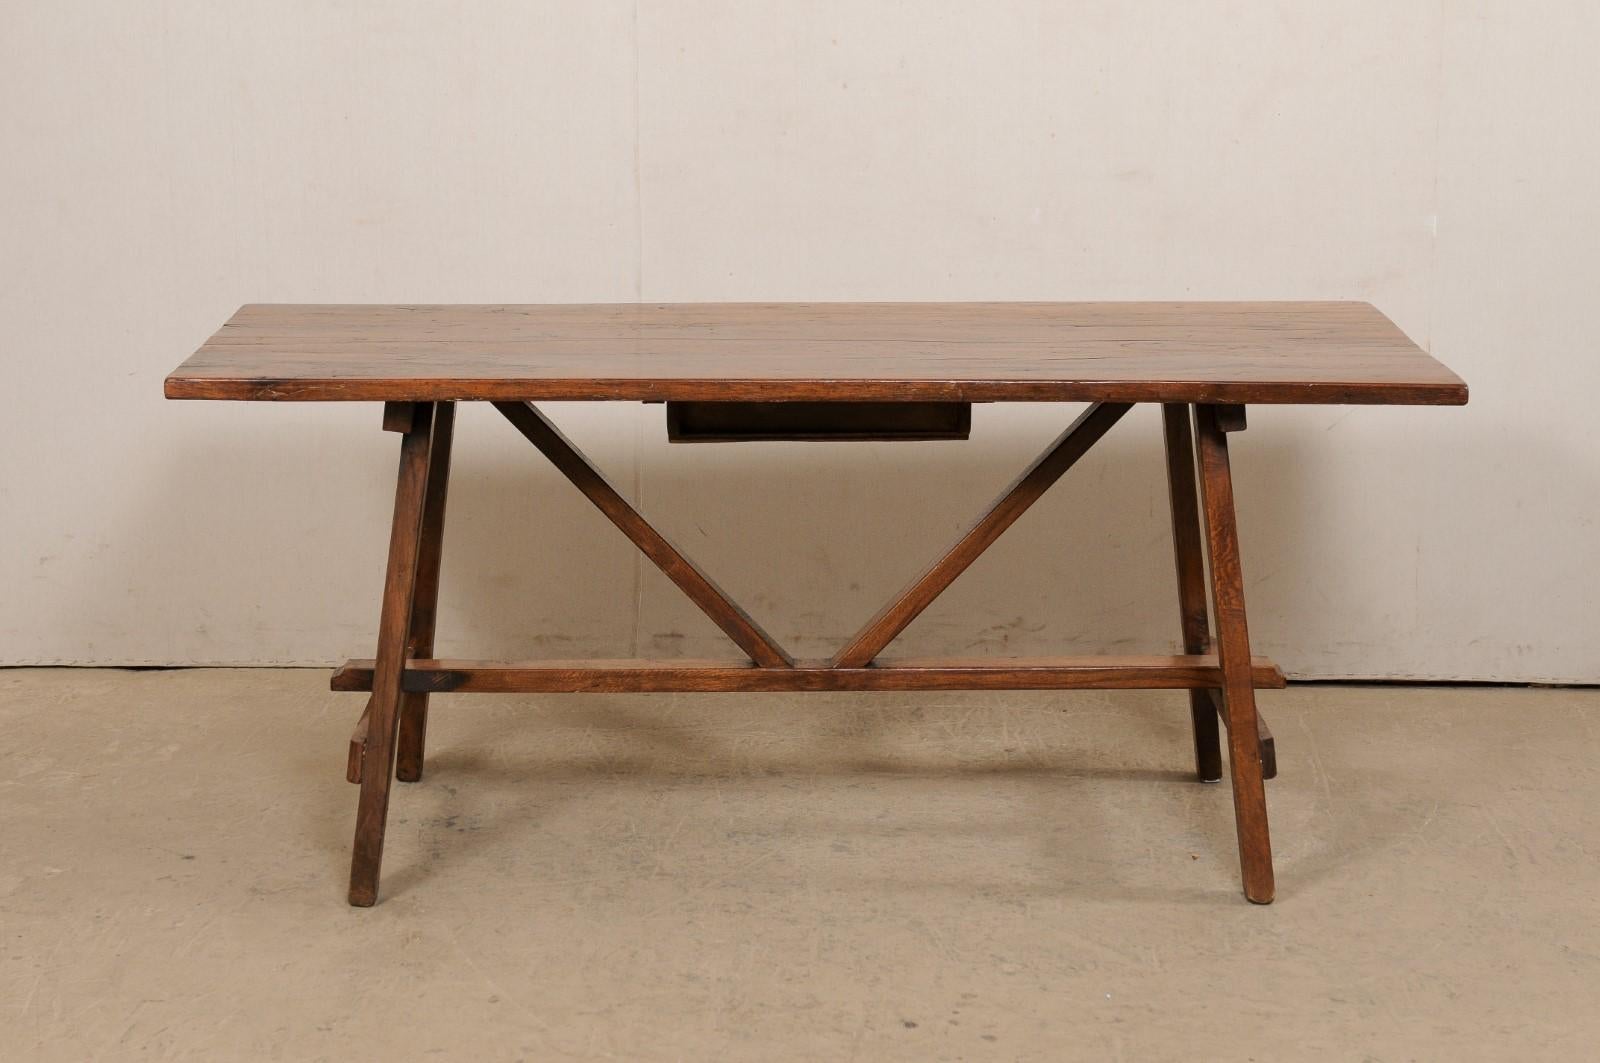 Early 18th C. Italian Walnut Table with V-Stretcher, a Great Desk Option 3